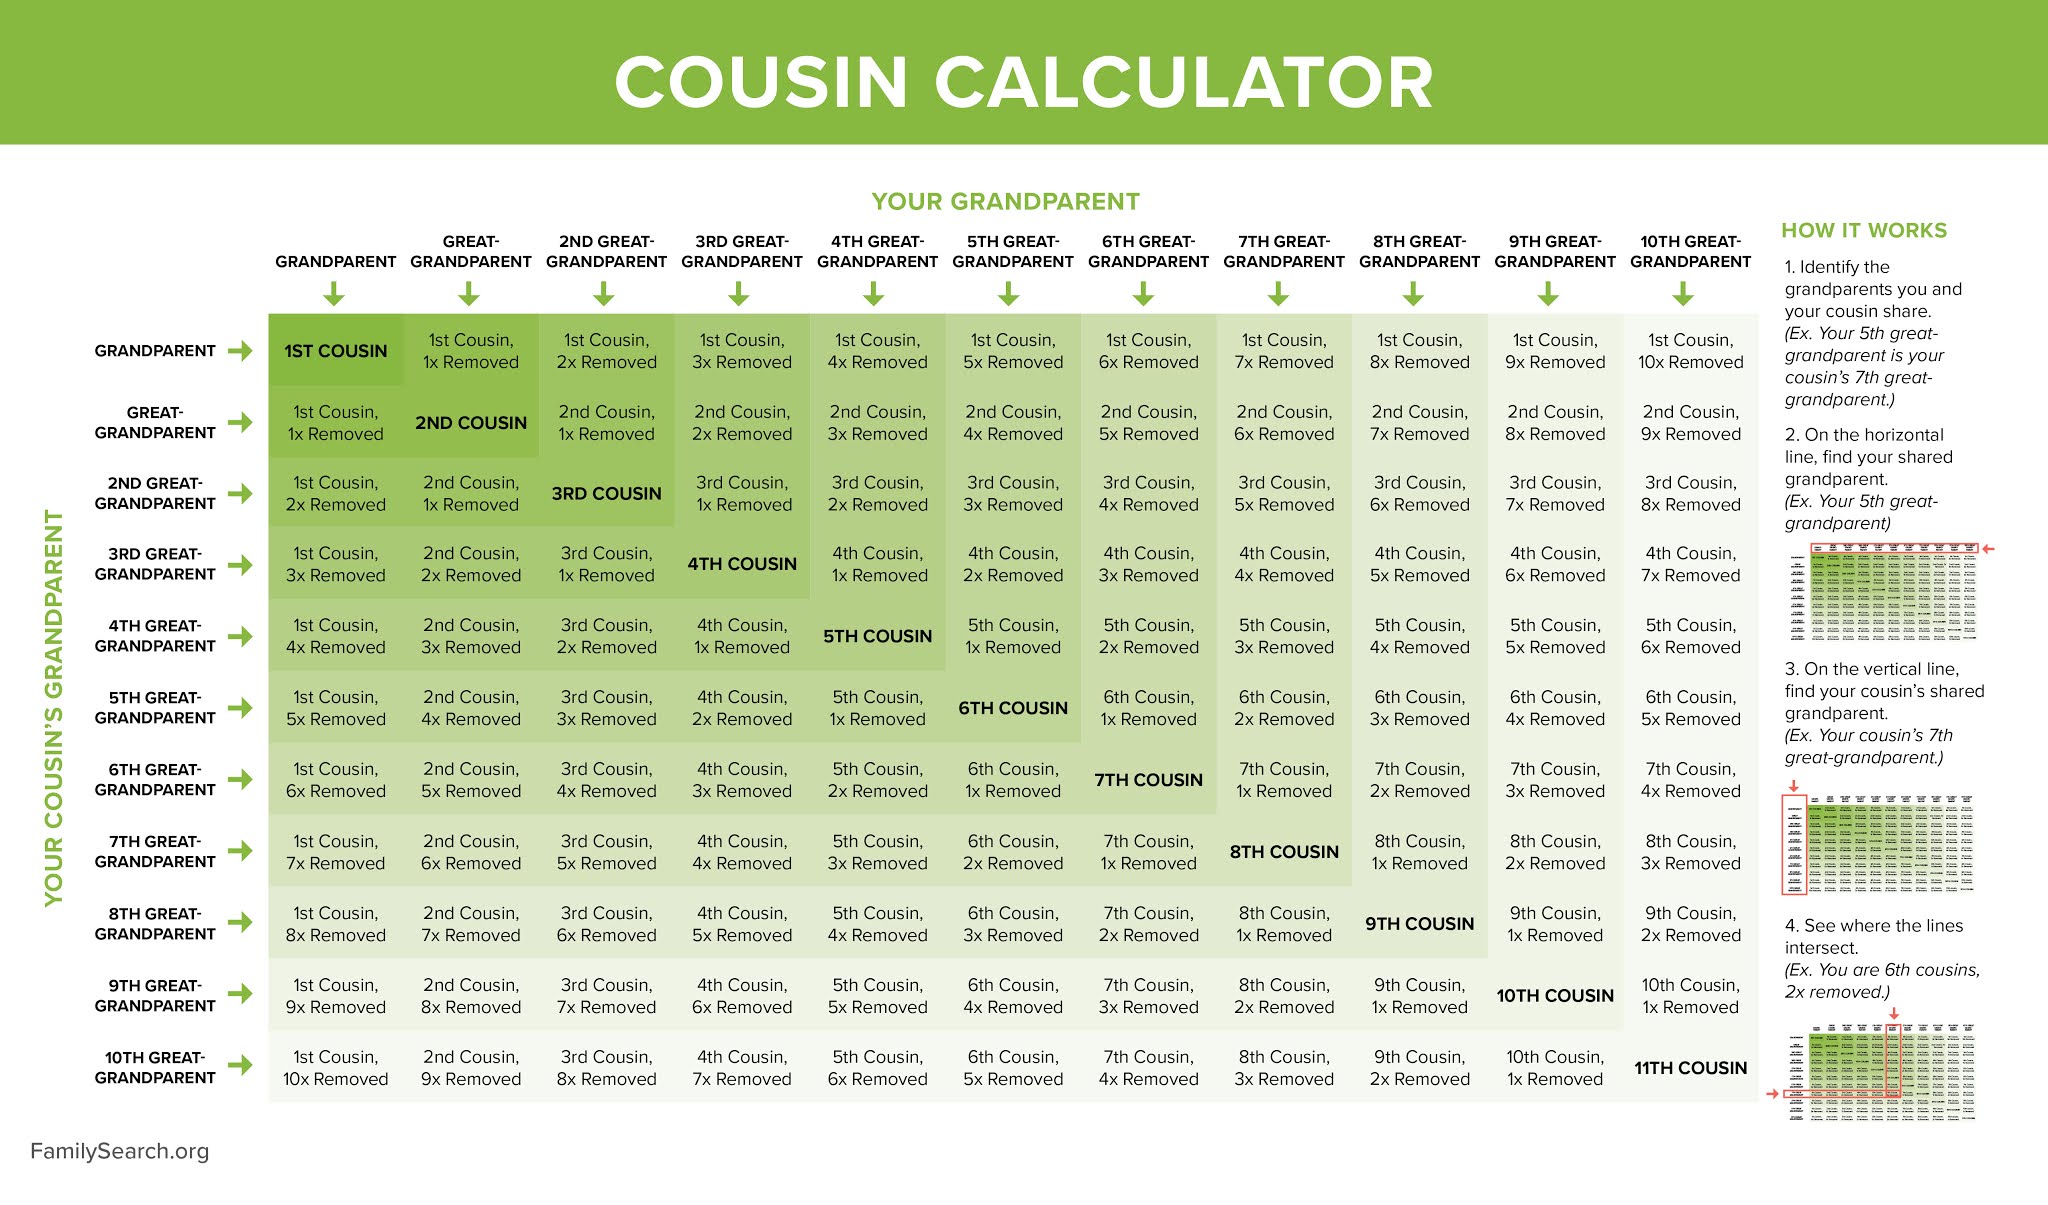 Understanding the Cousin Connection